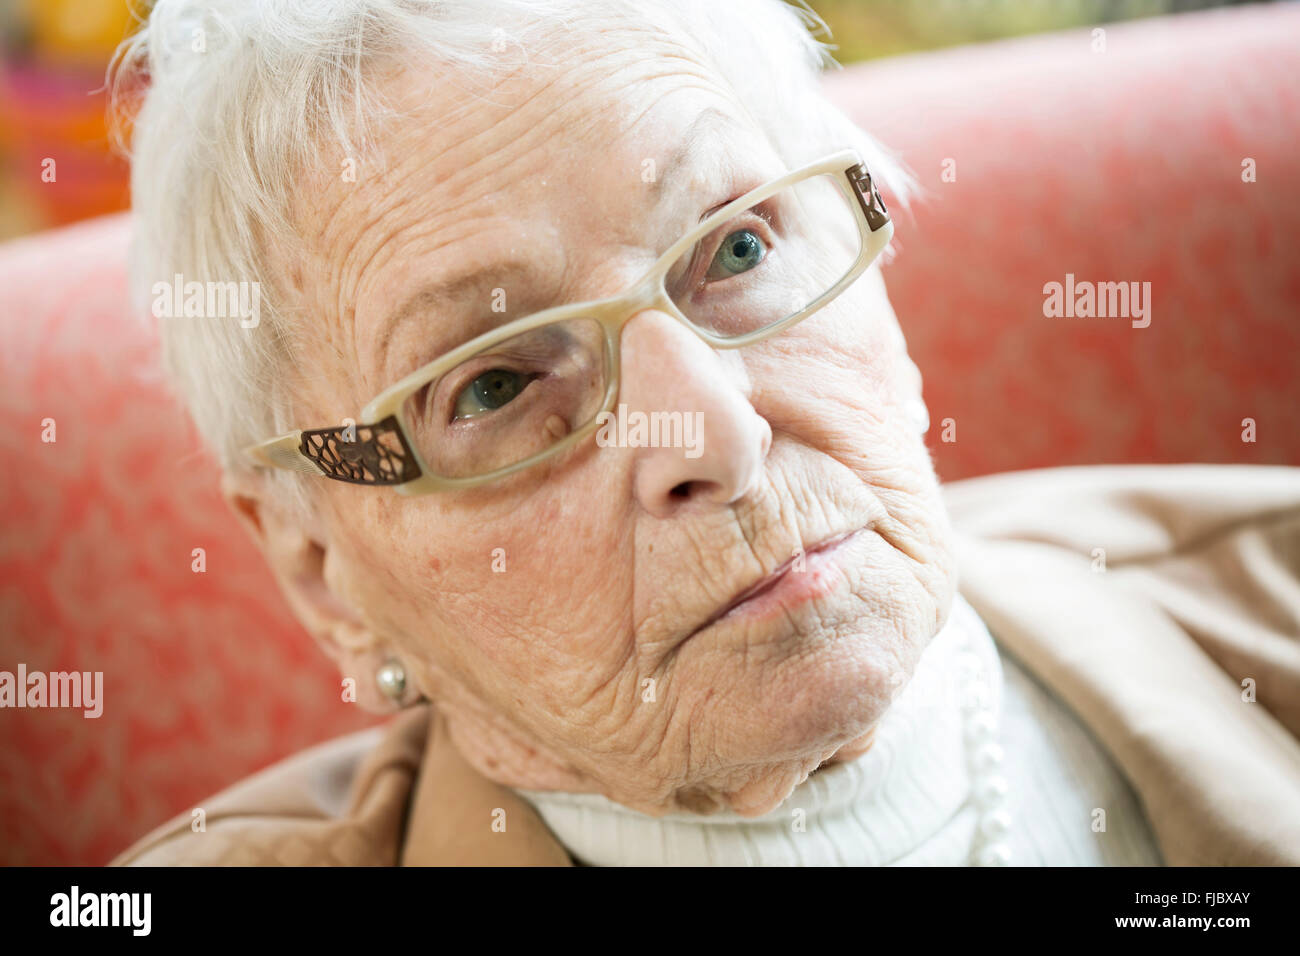 Senior suffering from dementia in a retirement home looking skeptical, portrait, Cologne, North Rhine-Westphalia, Germany Stock Photo